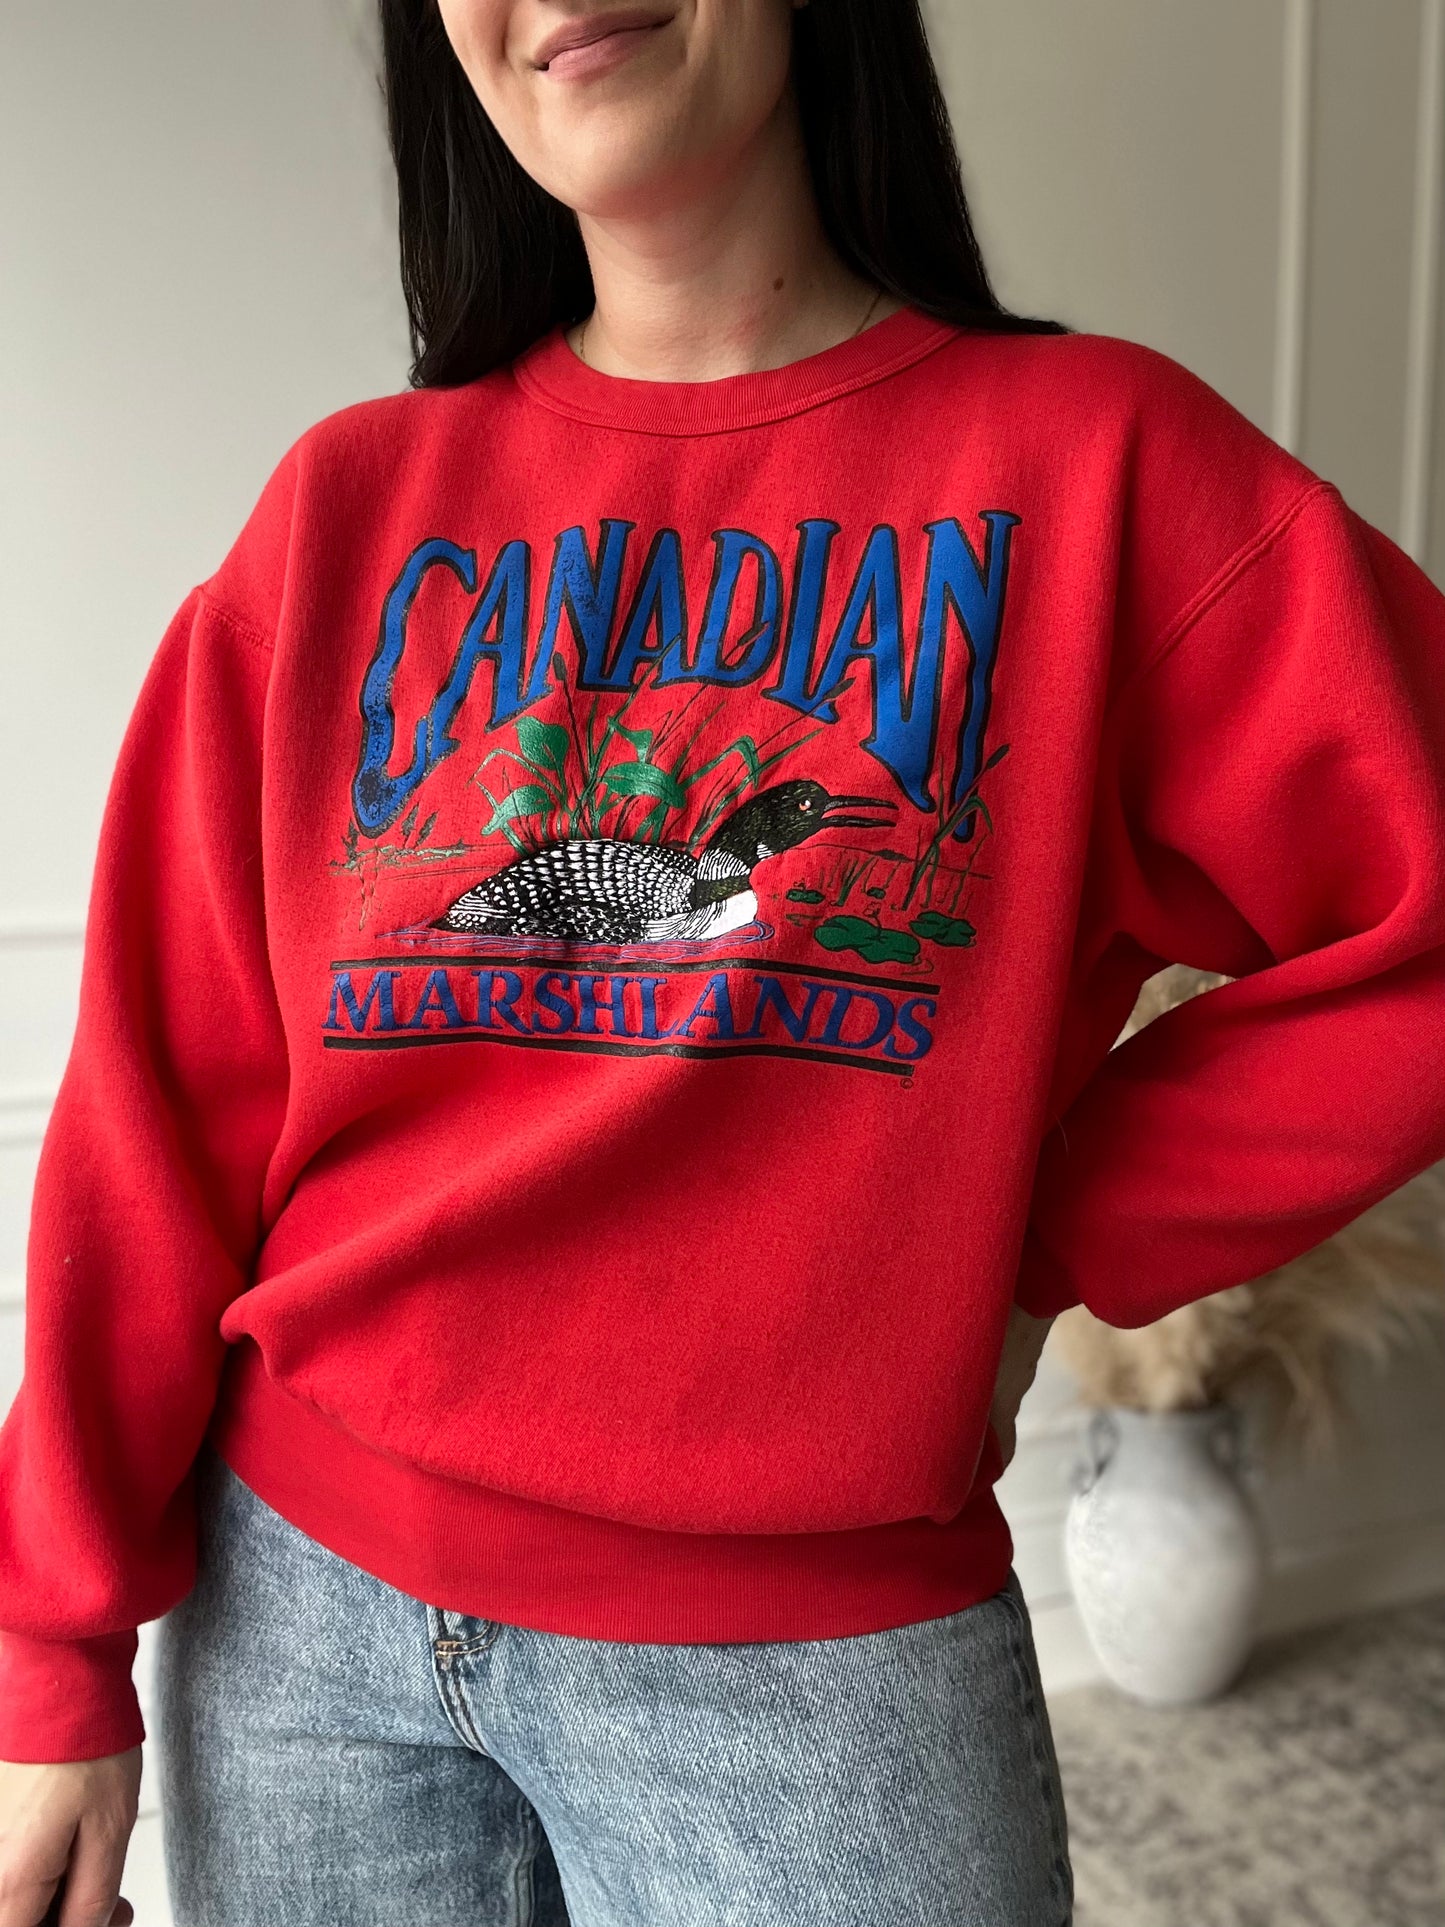 Canadian Marshlands Loon Sweater - Size L/XL